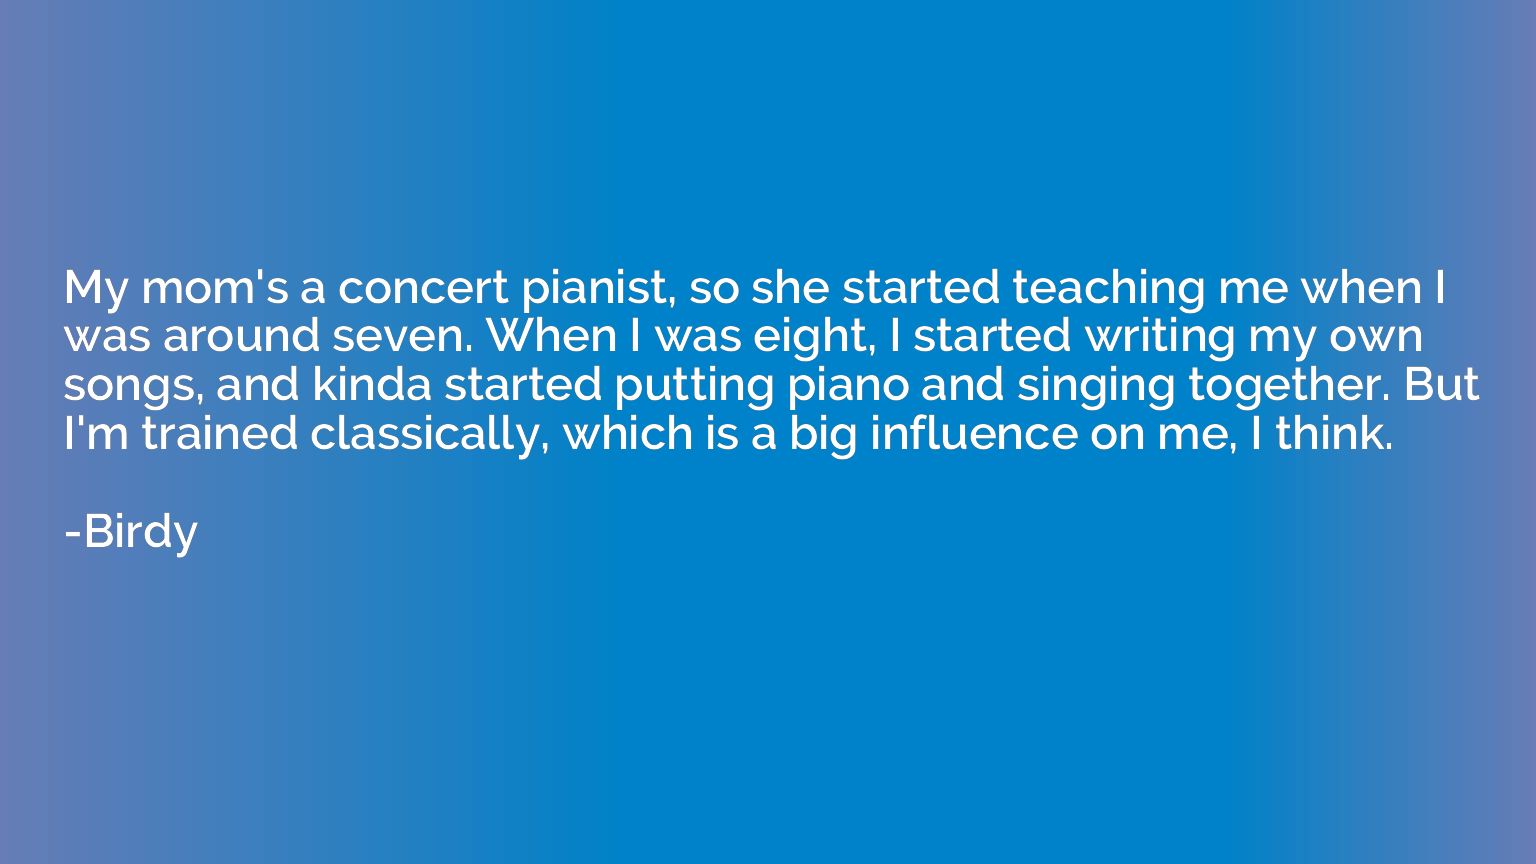 My mom's a concert pianist, so she started teaching me when 